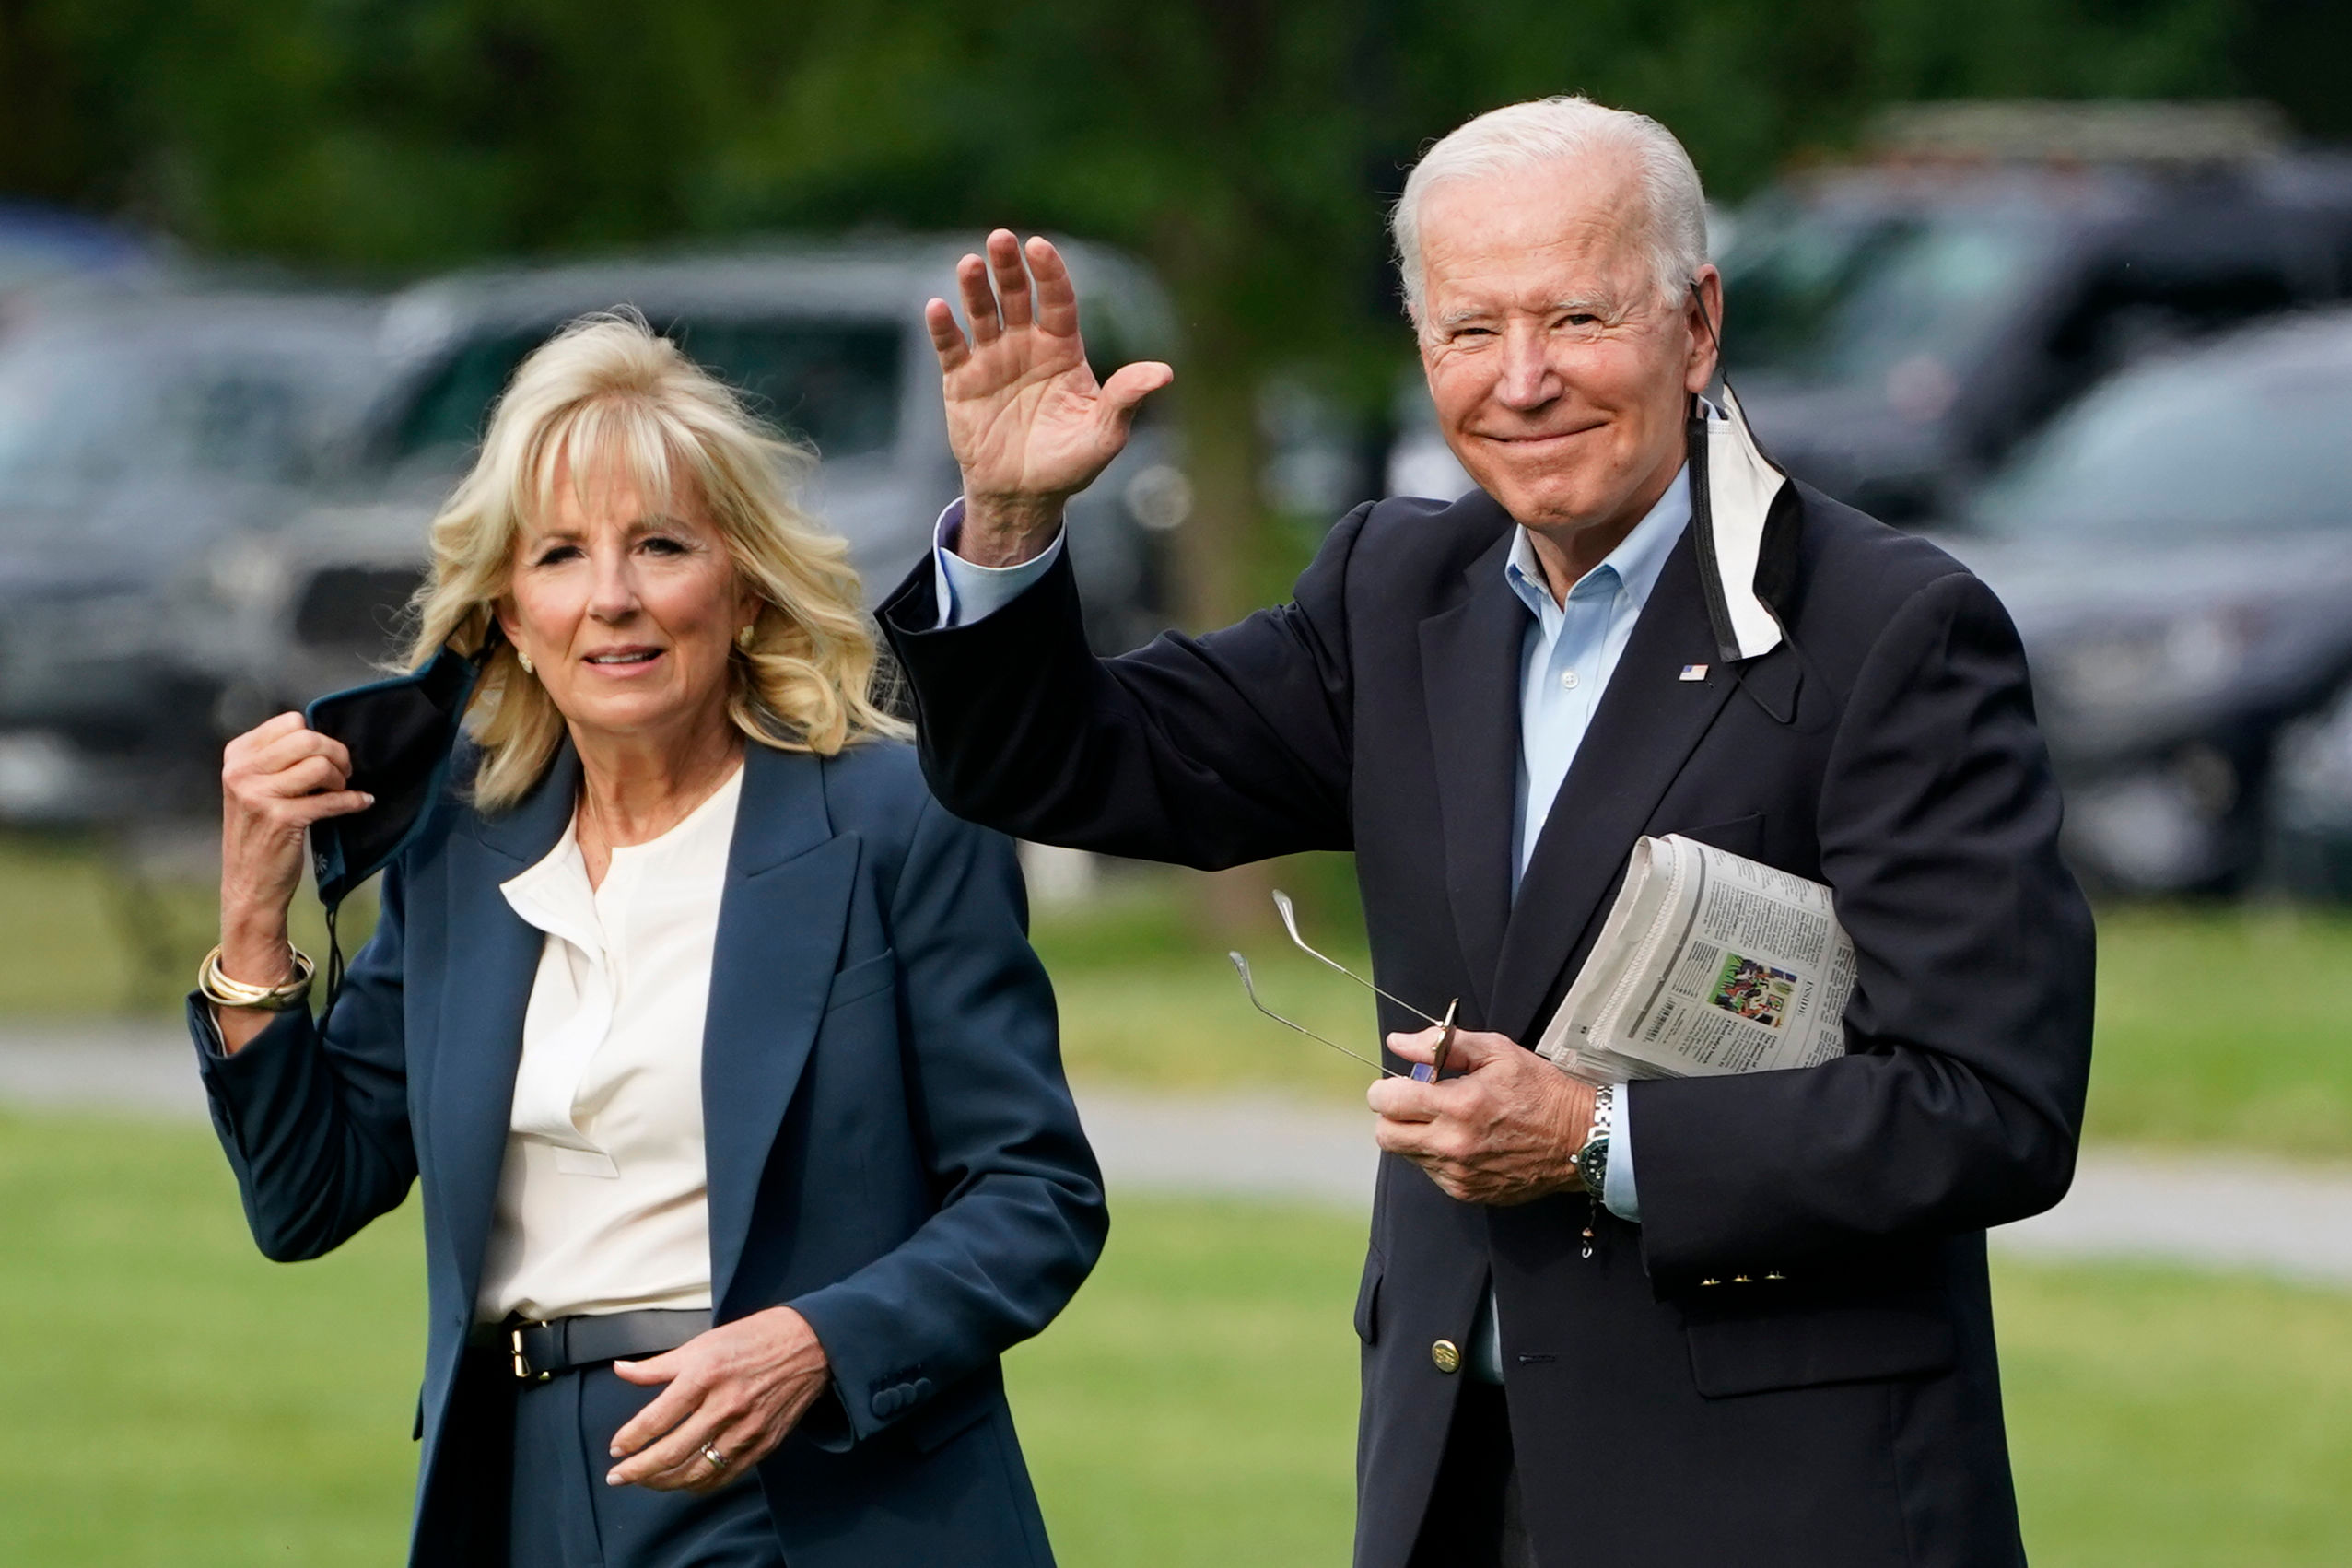 US First Lady Jill Biden to lead United States delegation to Tokyo Olympics